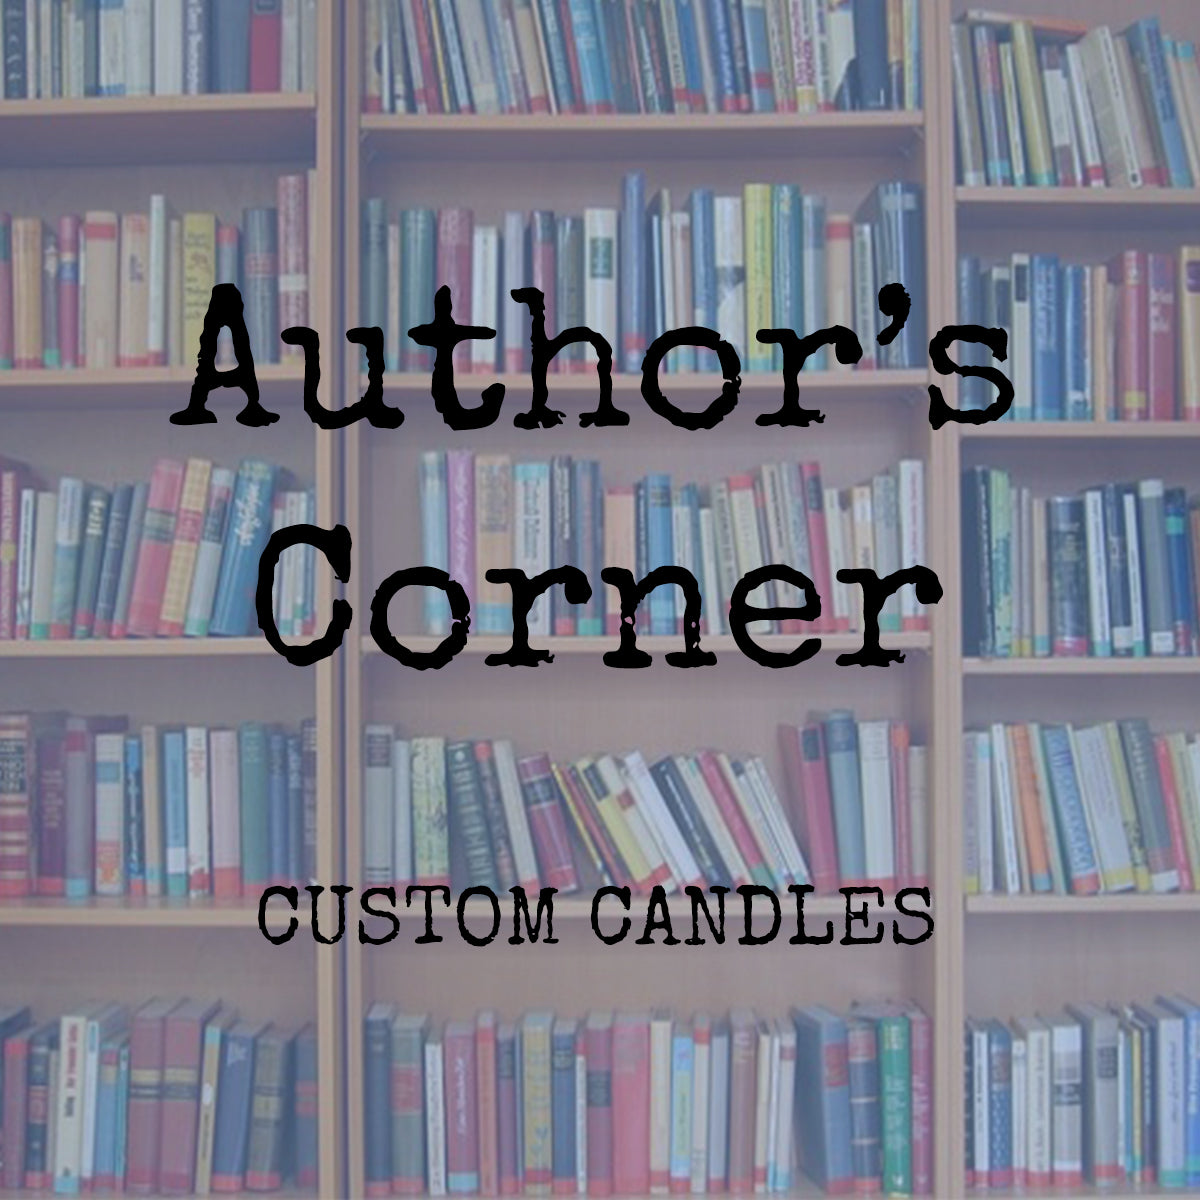 Author's Corner - Your Book's Custom Candle